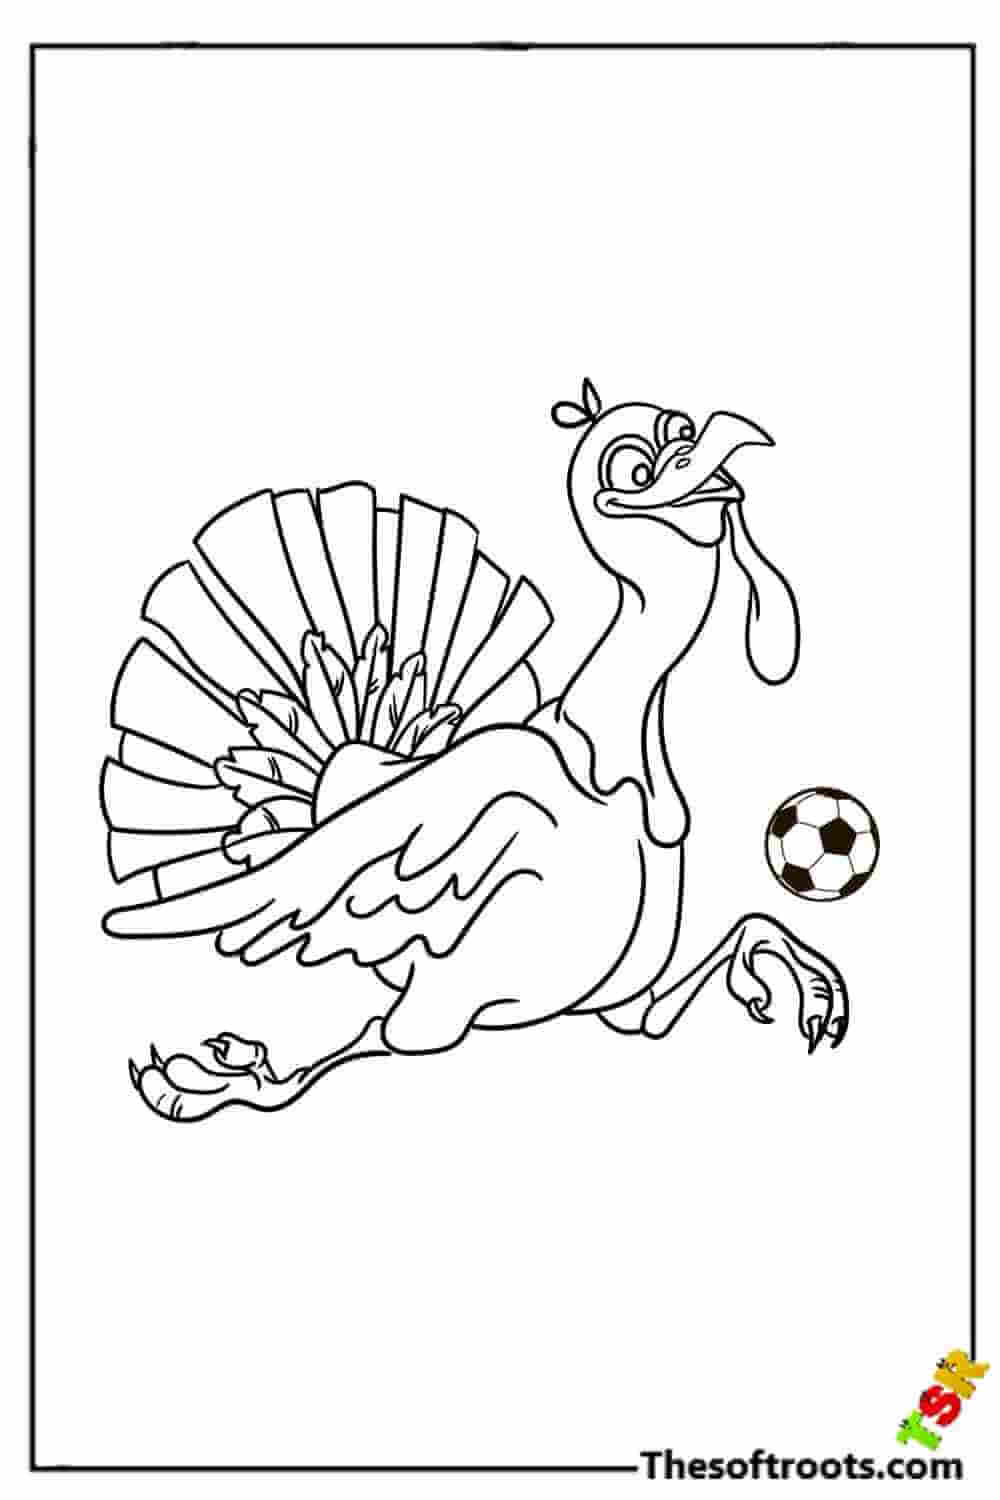 Funny turkey playing football coloring pages